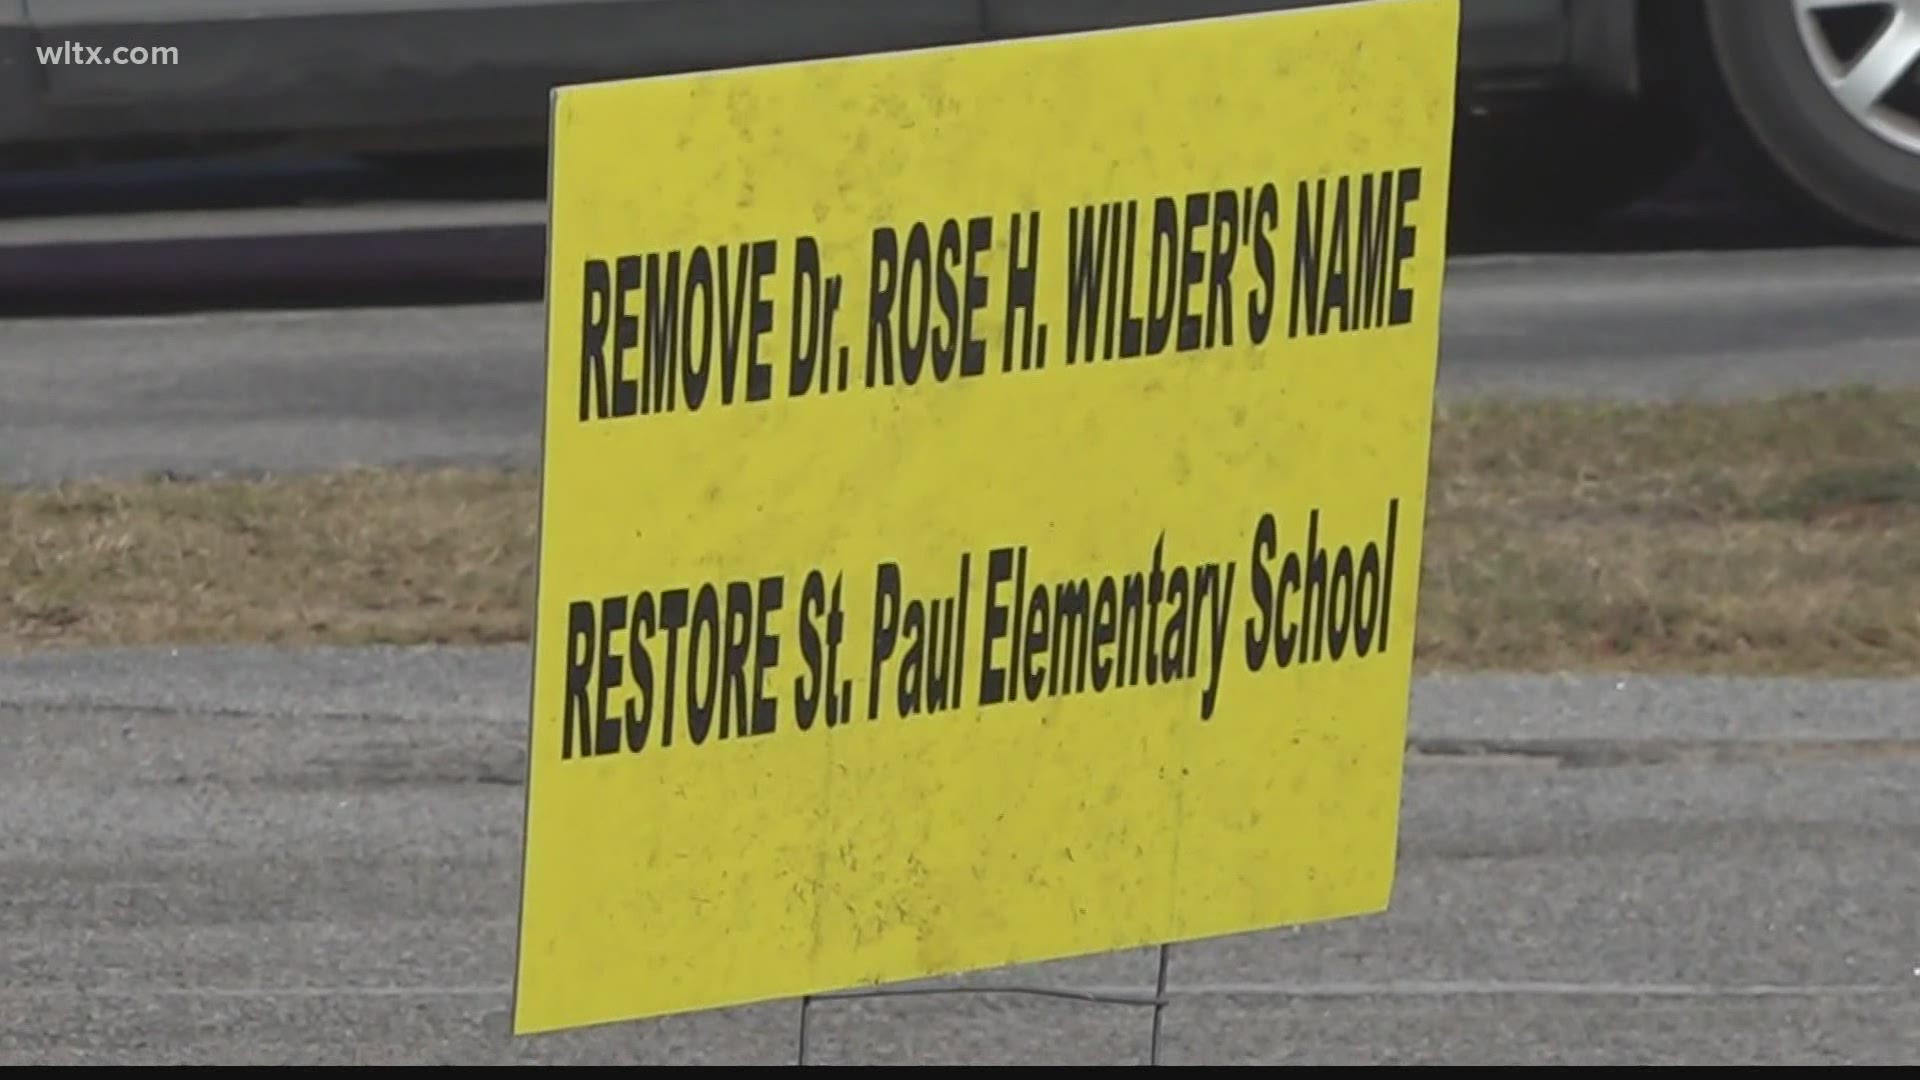 Dr. Rose H Wilder Elementary School used to be named St. Paul Elementary and some in the community feel the name change doesn't have the same historic value.